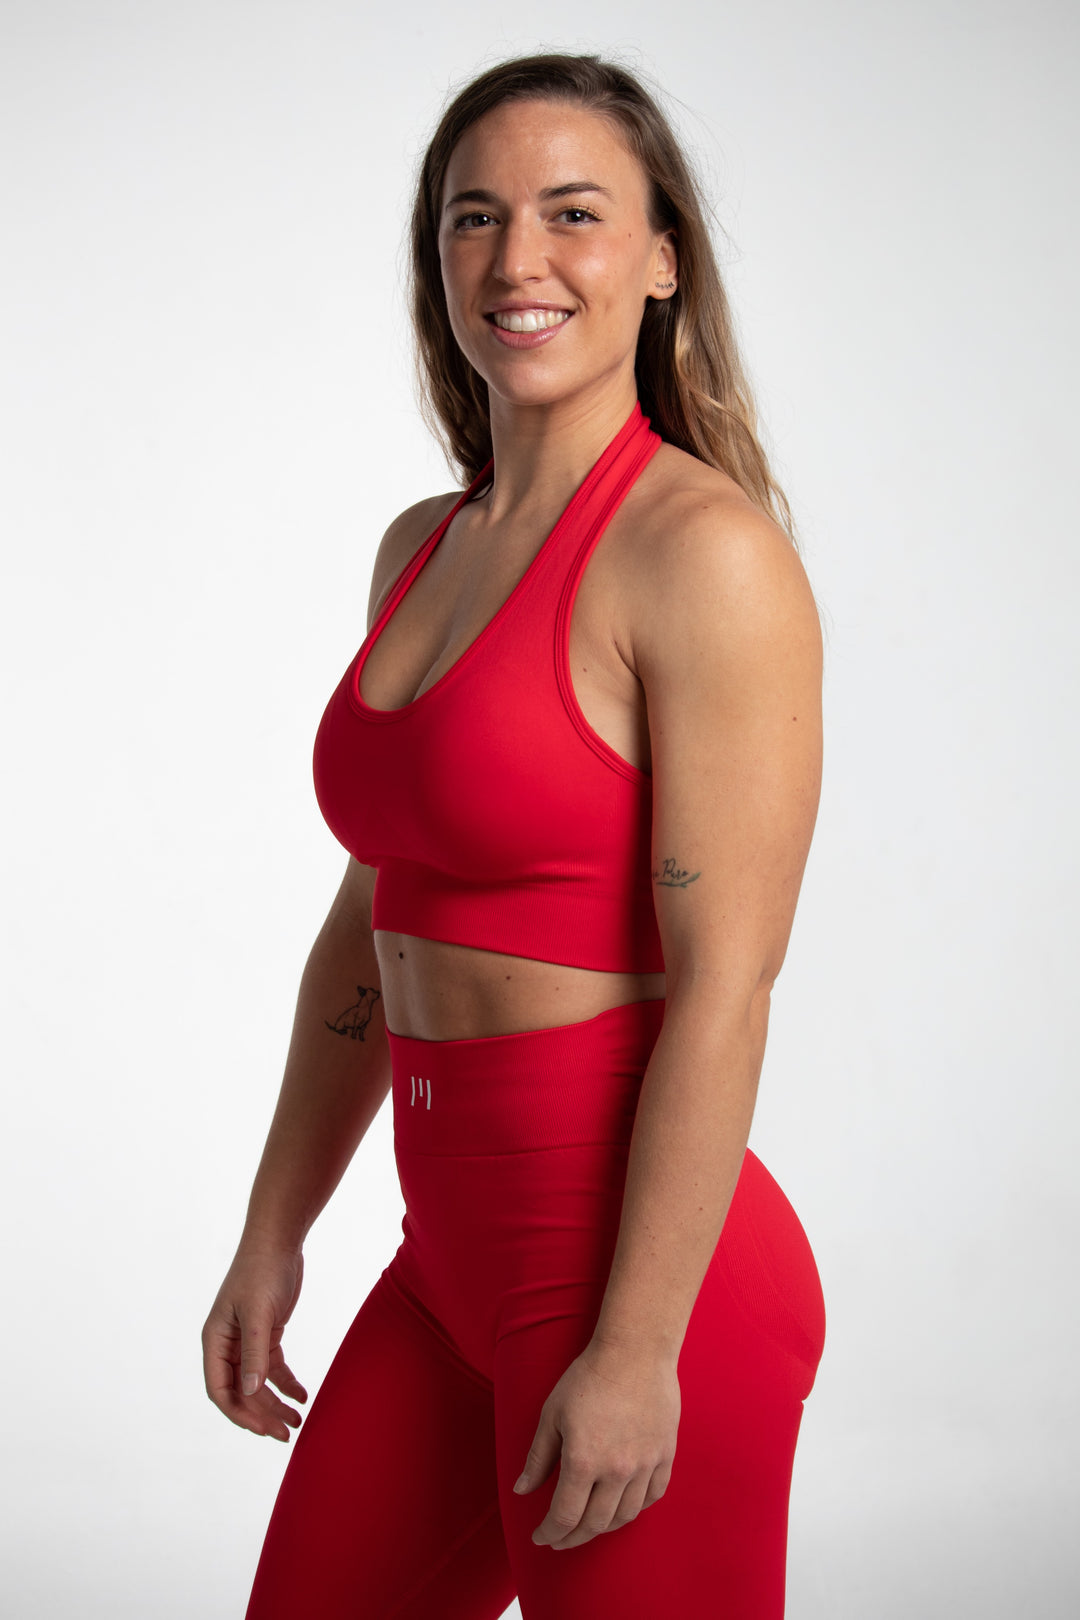 LYOM™ Invincible Top - Passion Red